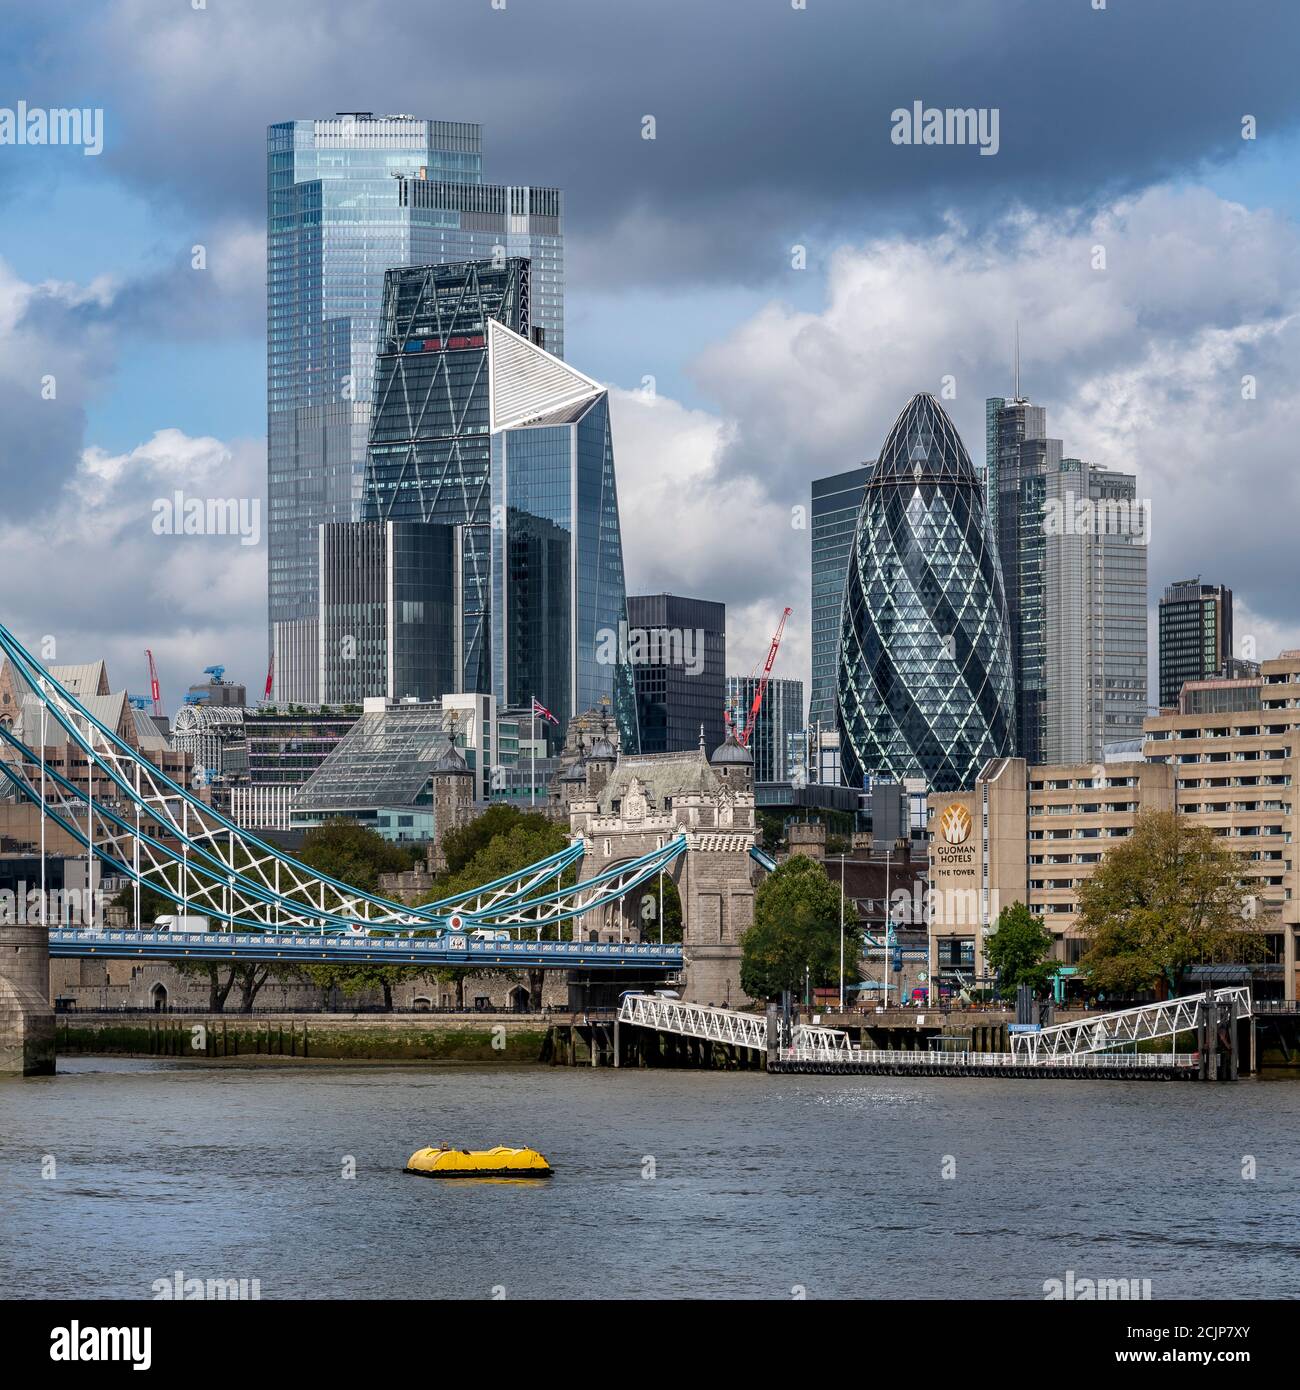 London cityscape, shot from Butler's Wharf. Skyscrapers shown are The Cheesegrater, The Scalpel, The Gherkin and the new tallest one called Twentytwo. Stock Photo